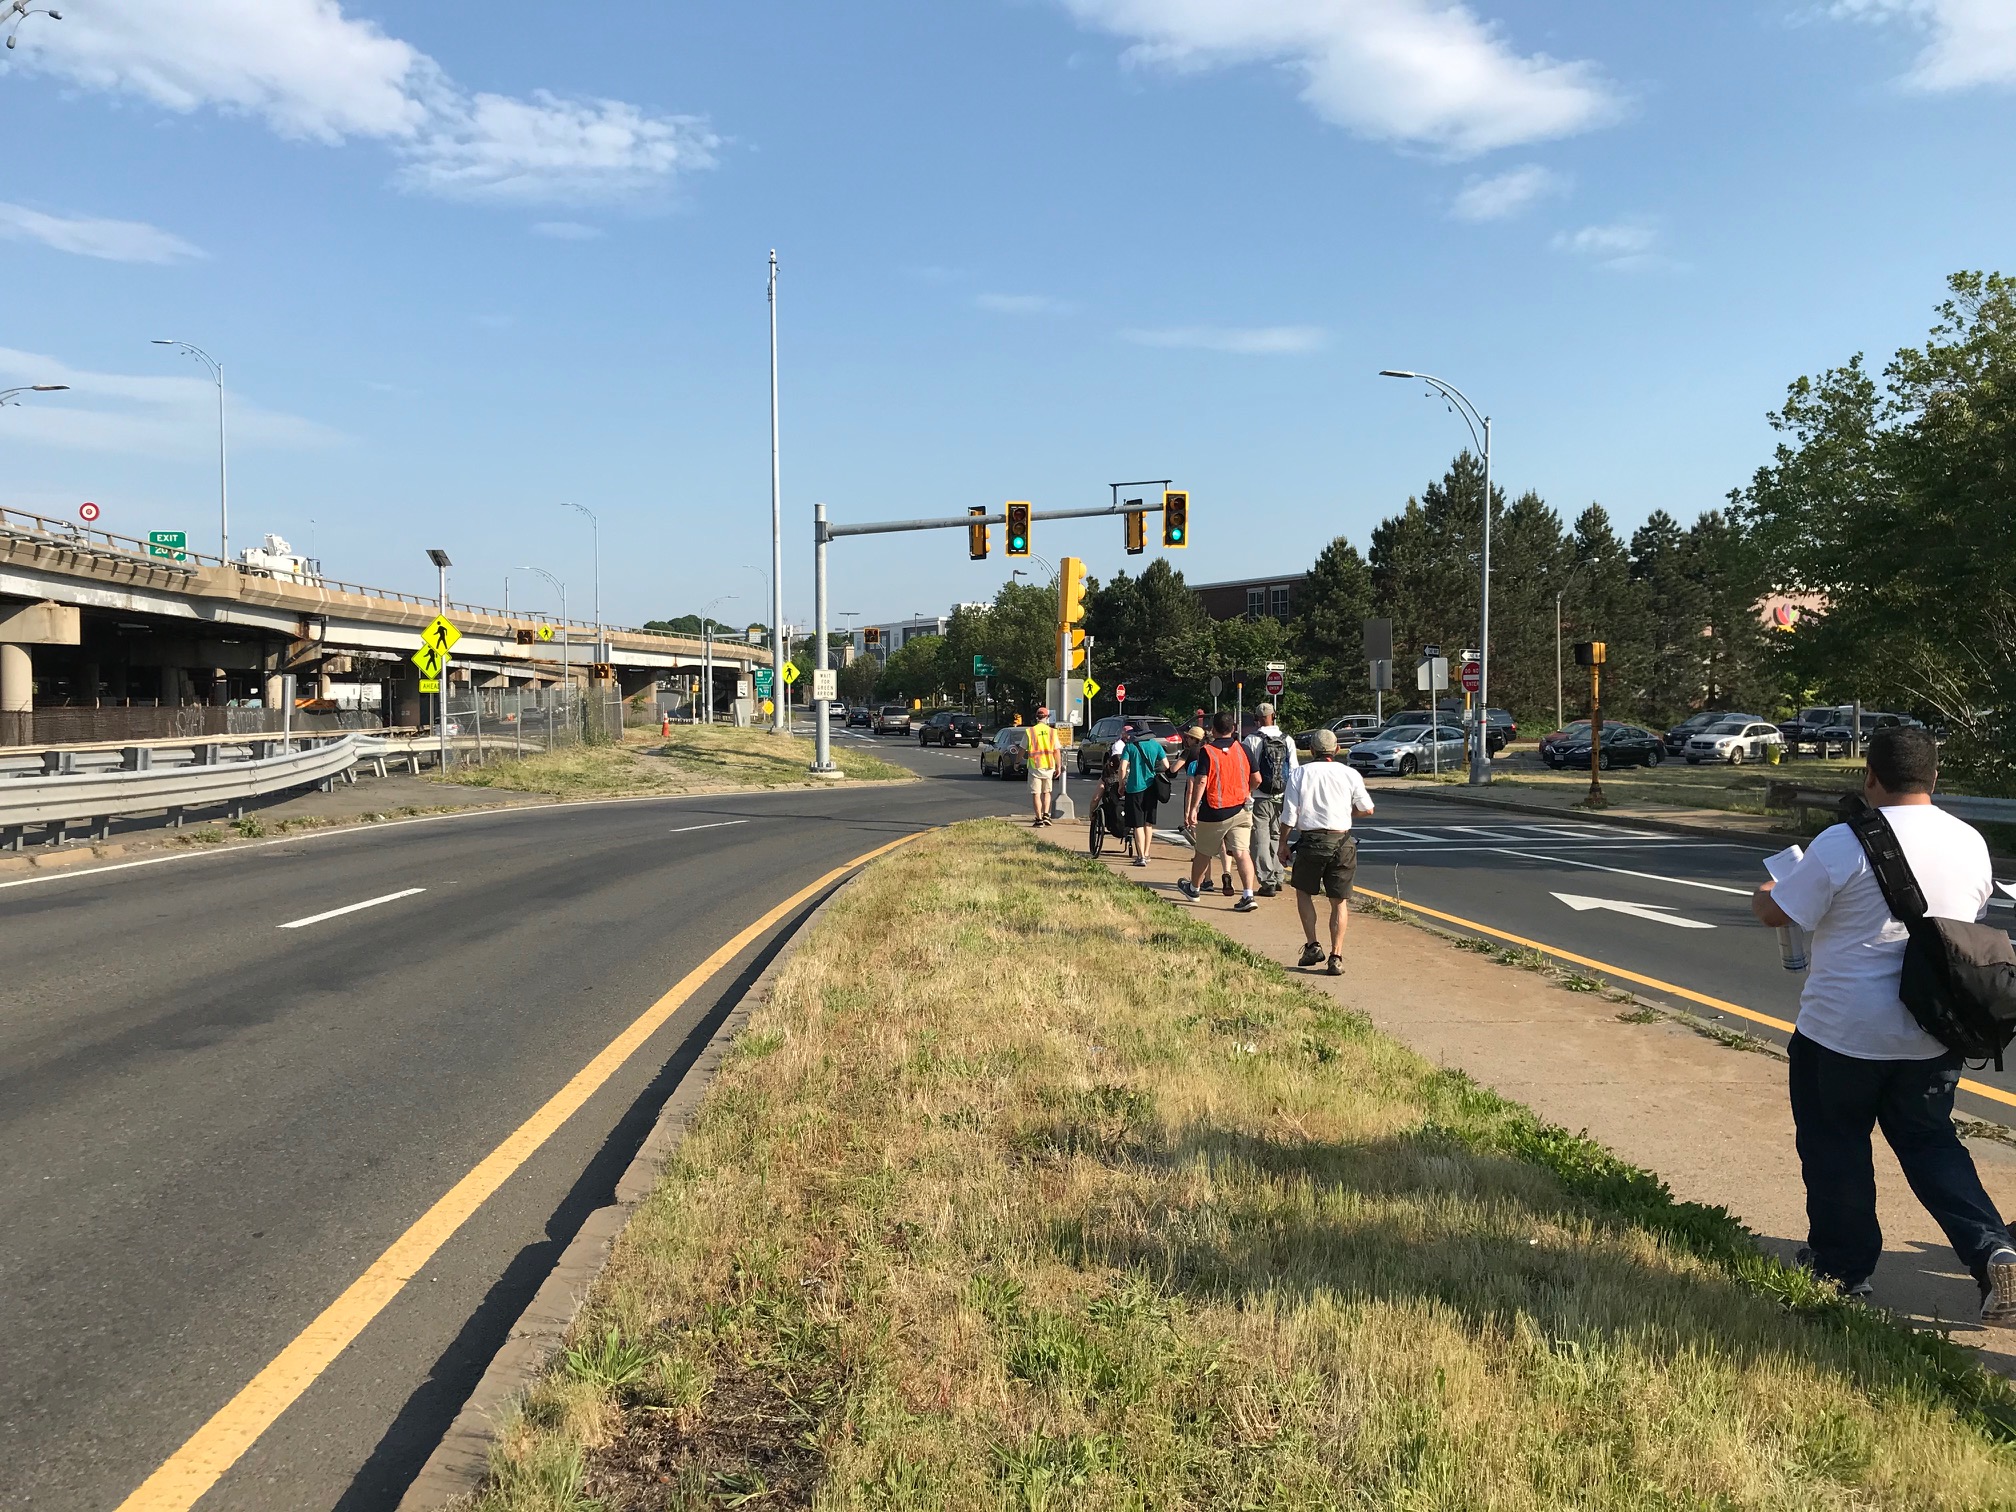 Walking from one side of McGrath Highway to the other along Mystic Avenue requires pedestrians to cross multiple highway ramps and walk along "sidewalks" like this one, in the middle of the roadway.